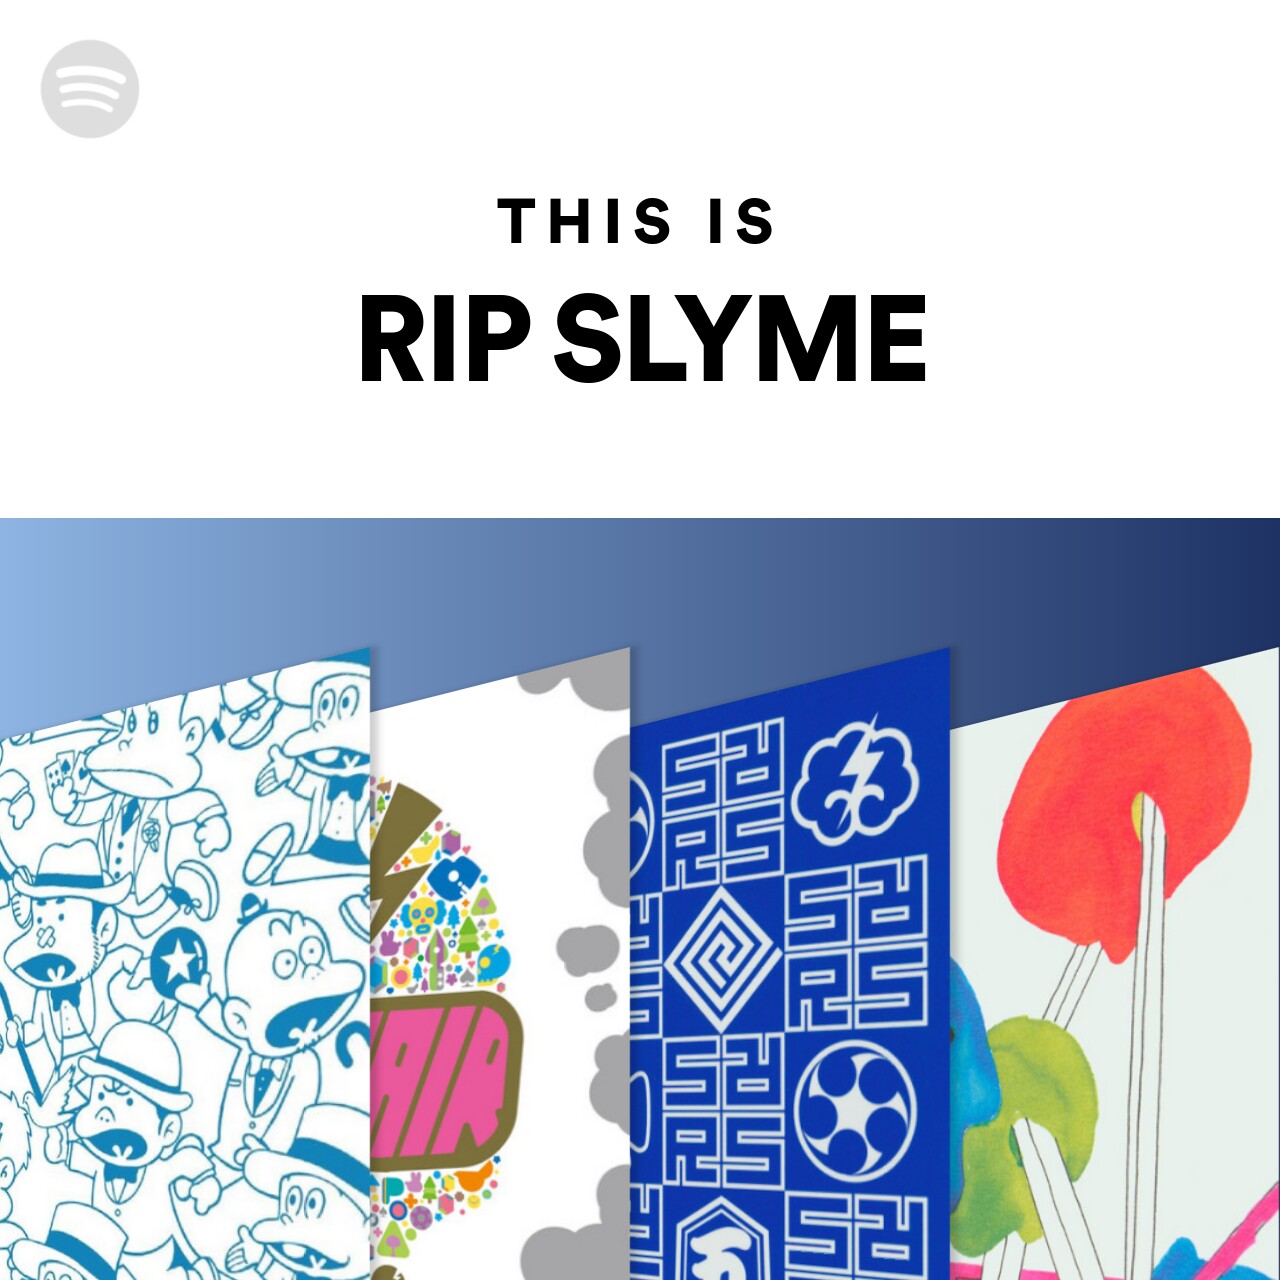 This Is RIP SLYME